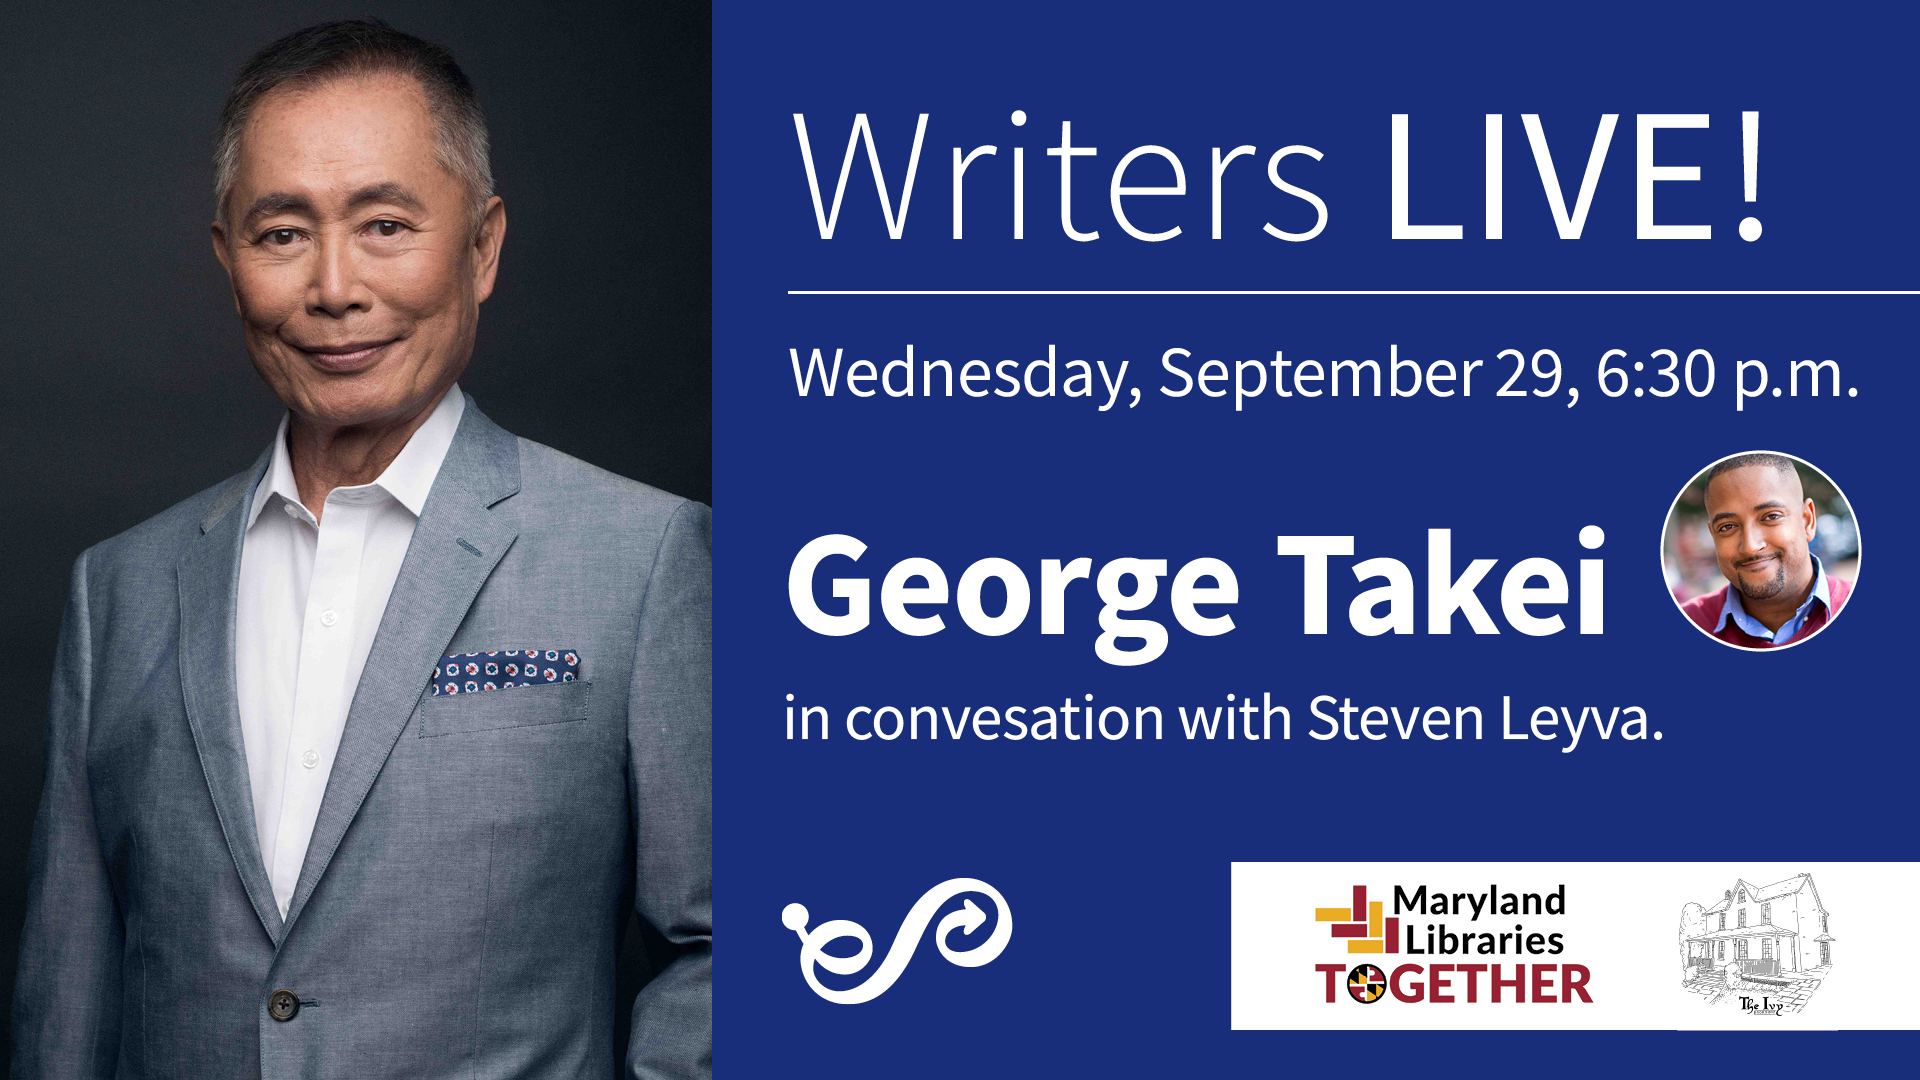 Image of George Takei in a gray suit with Writers Live information in blue box to right